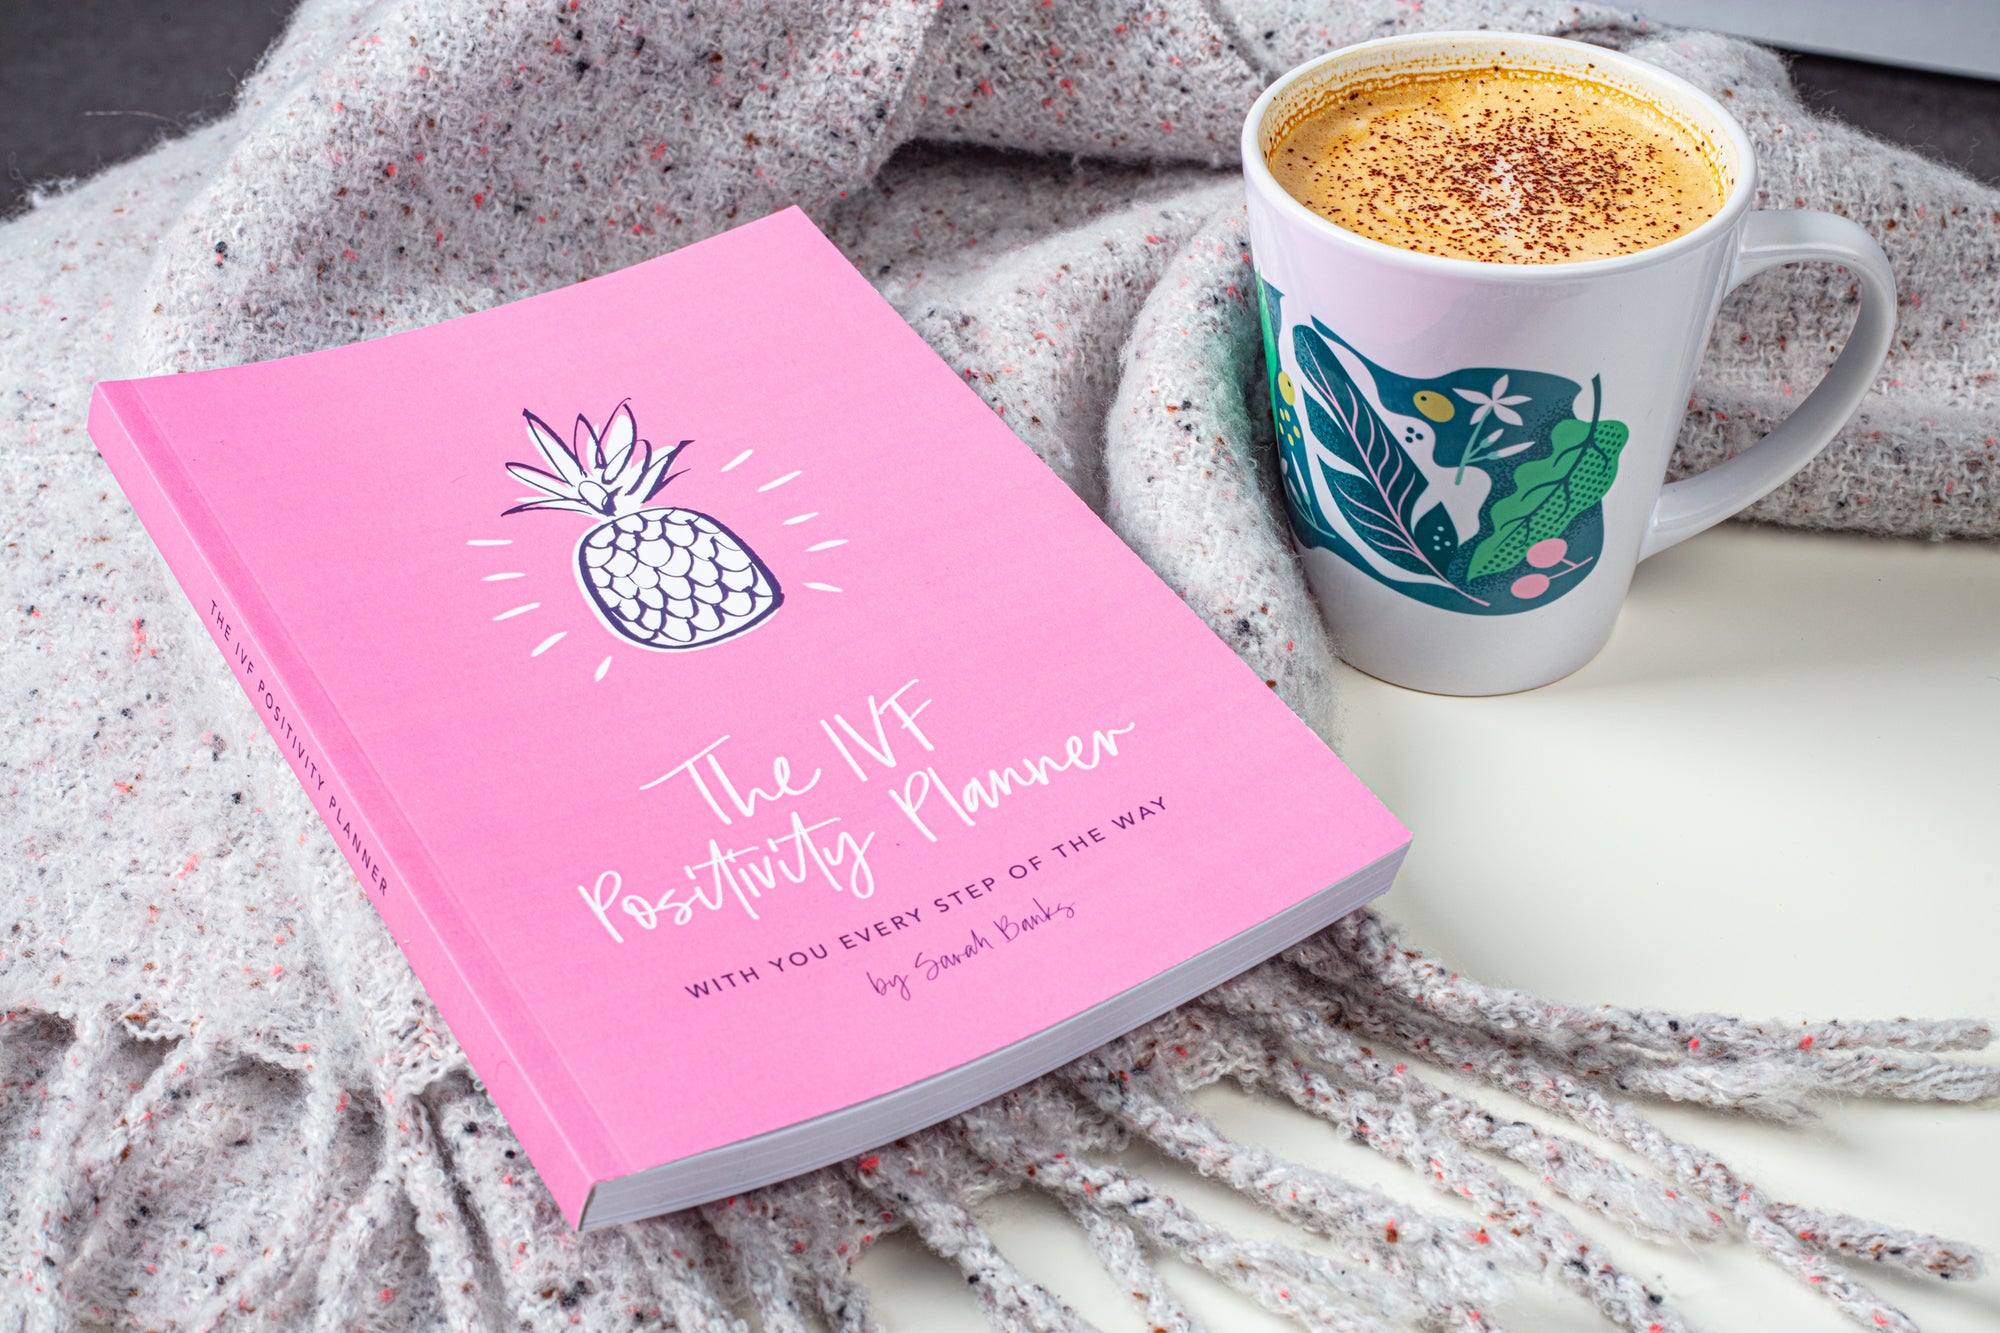 About The IVF Positivity Planner